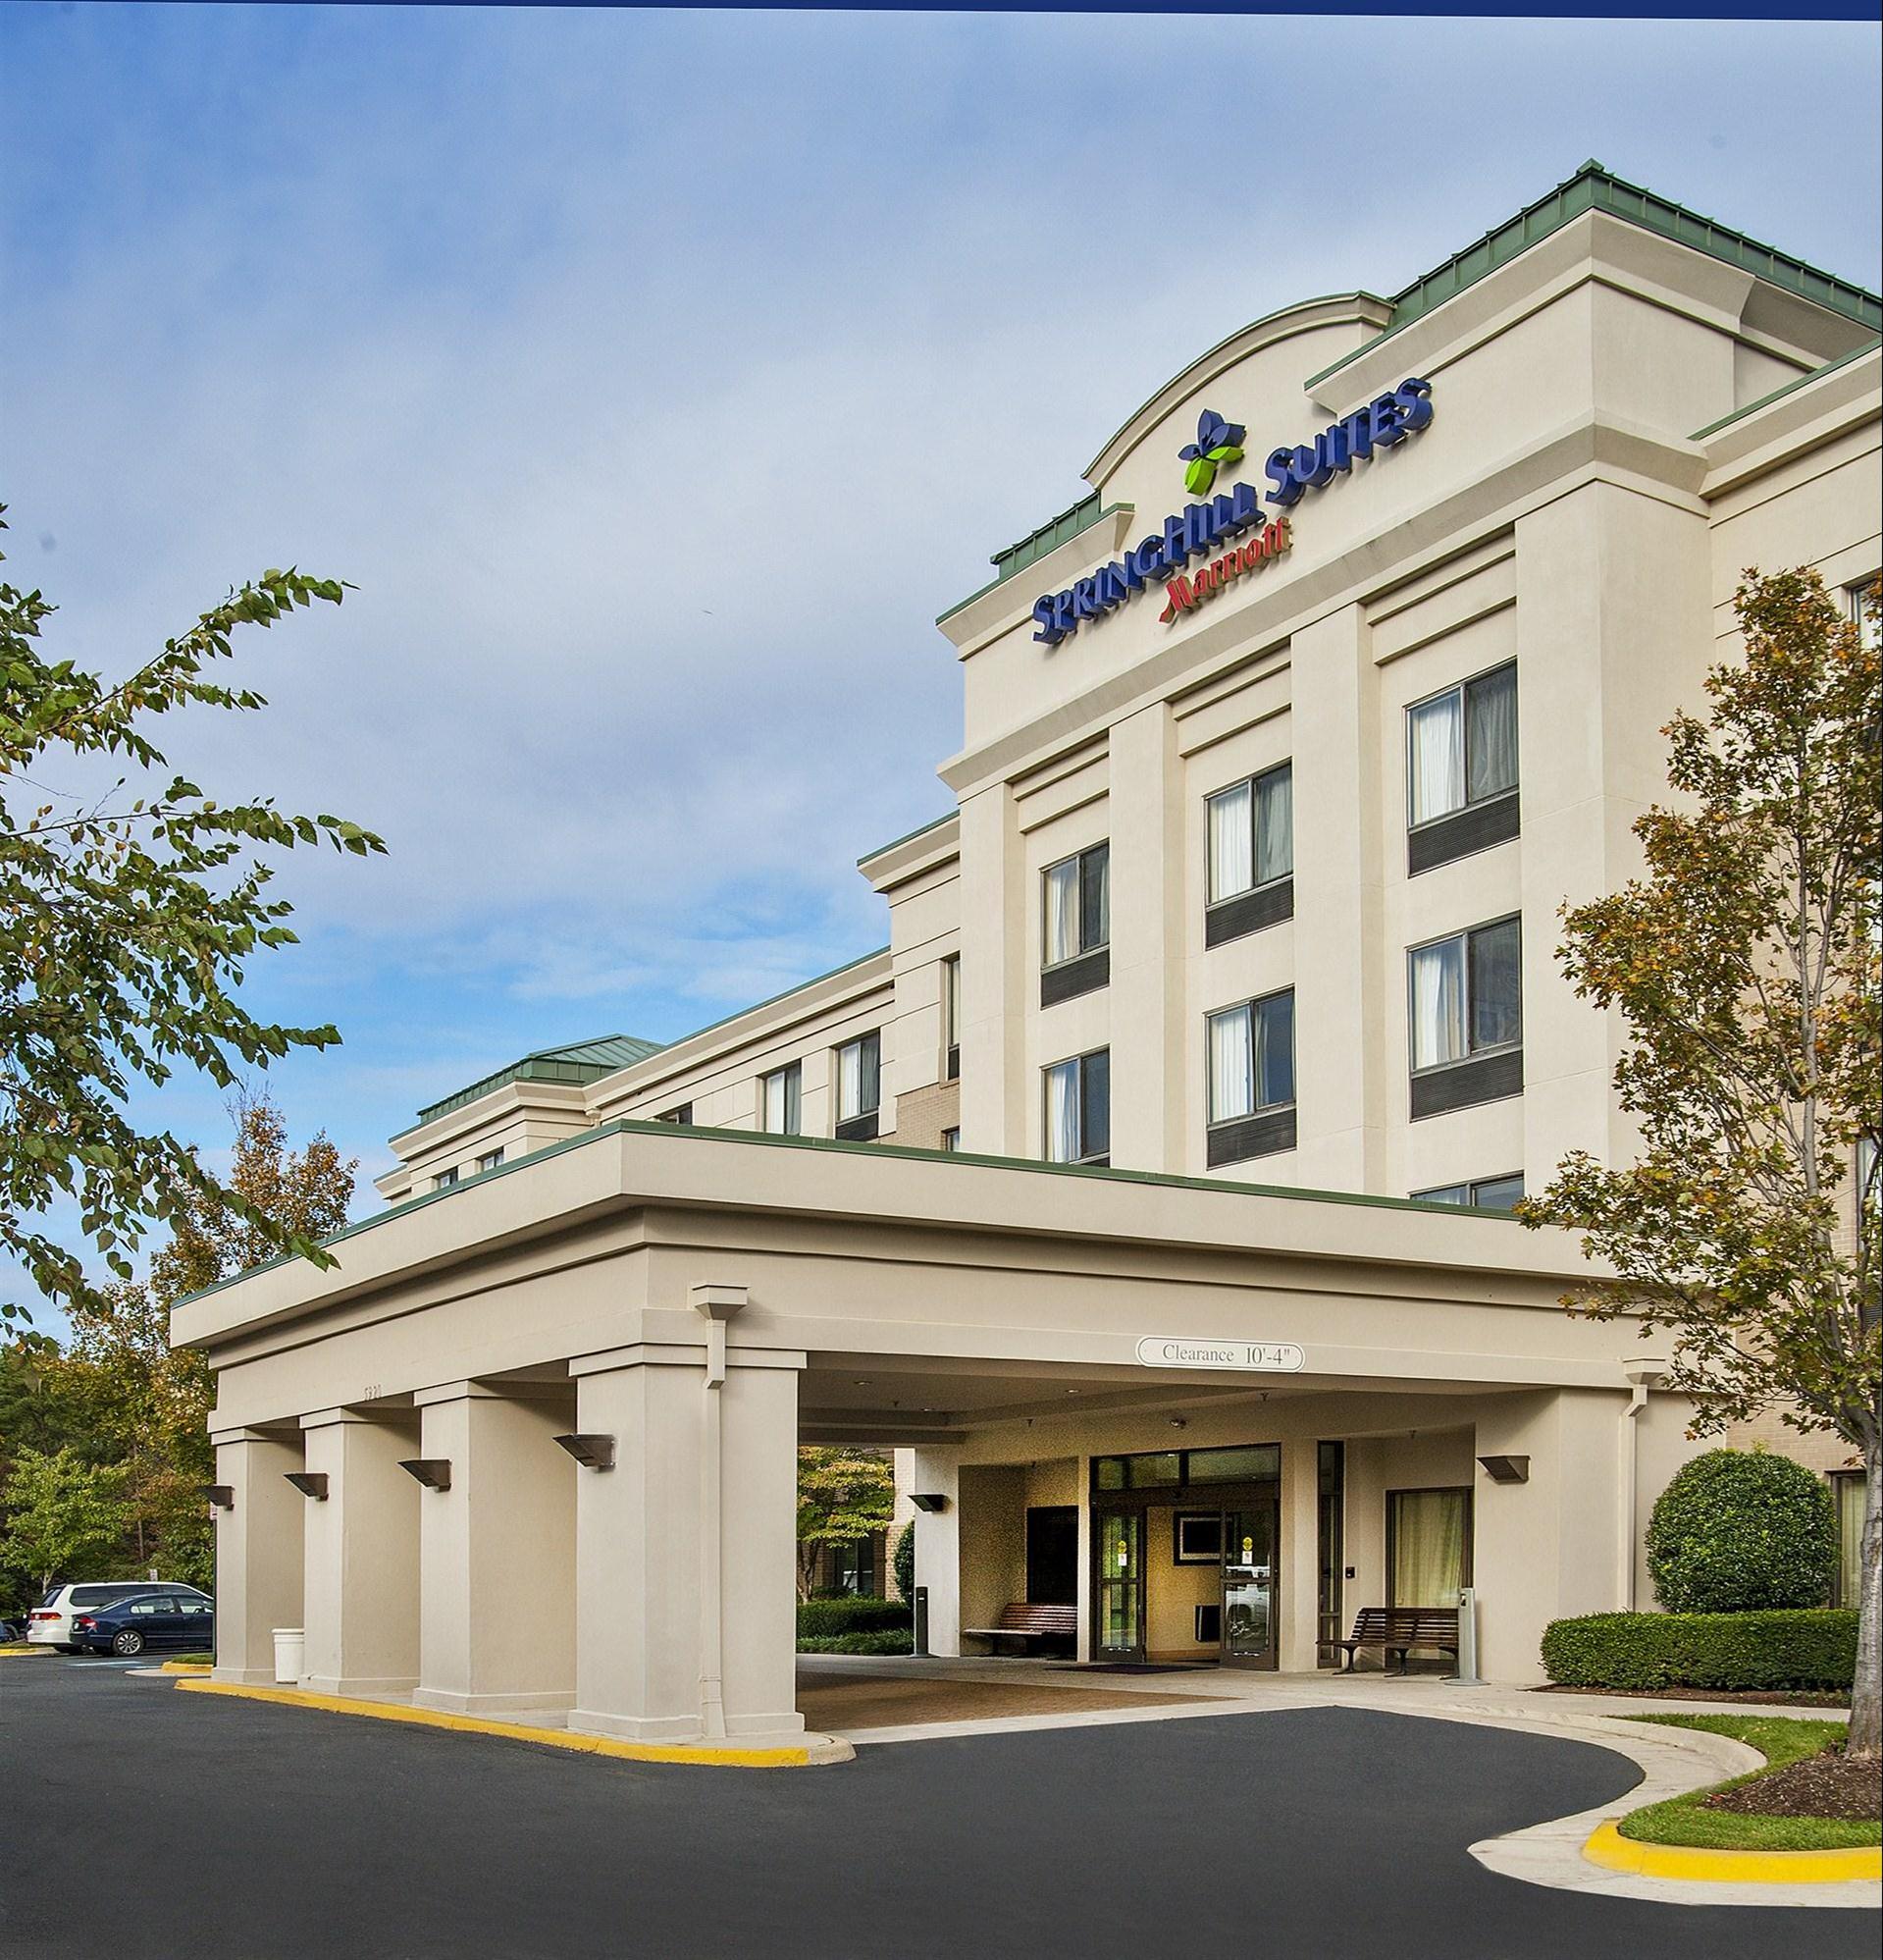 SpringHill Suites Centreville Chantilly in Centreville, VA